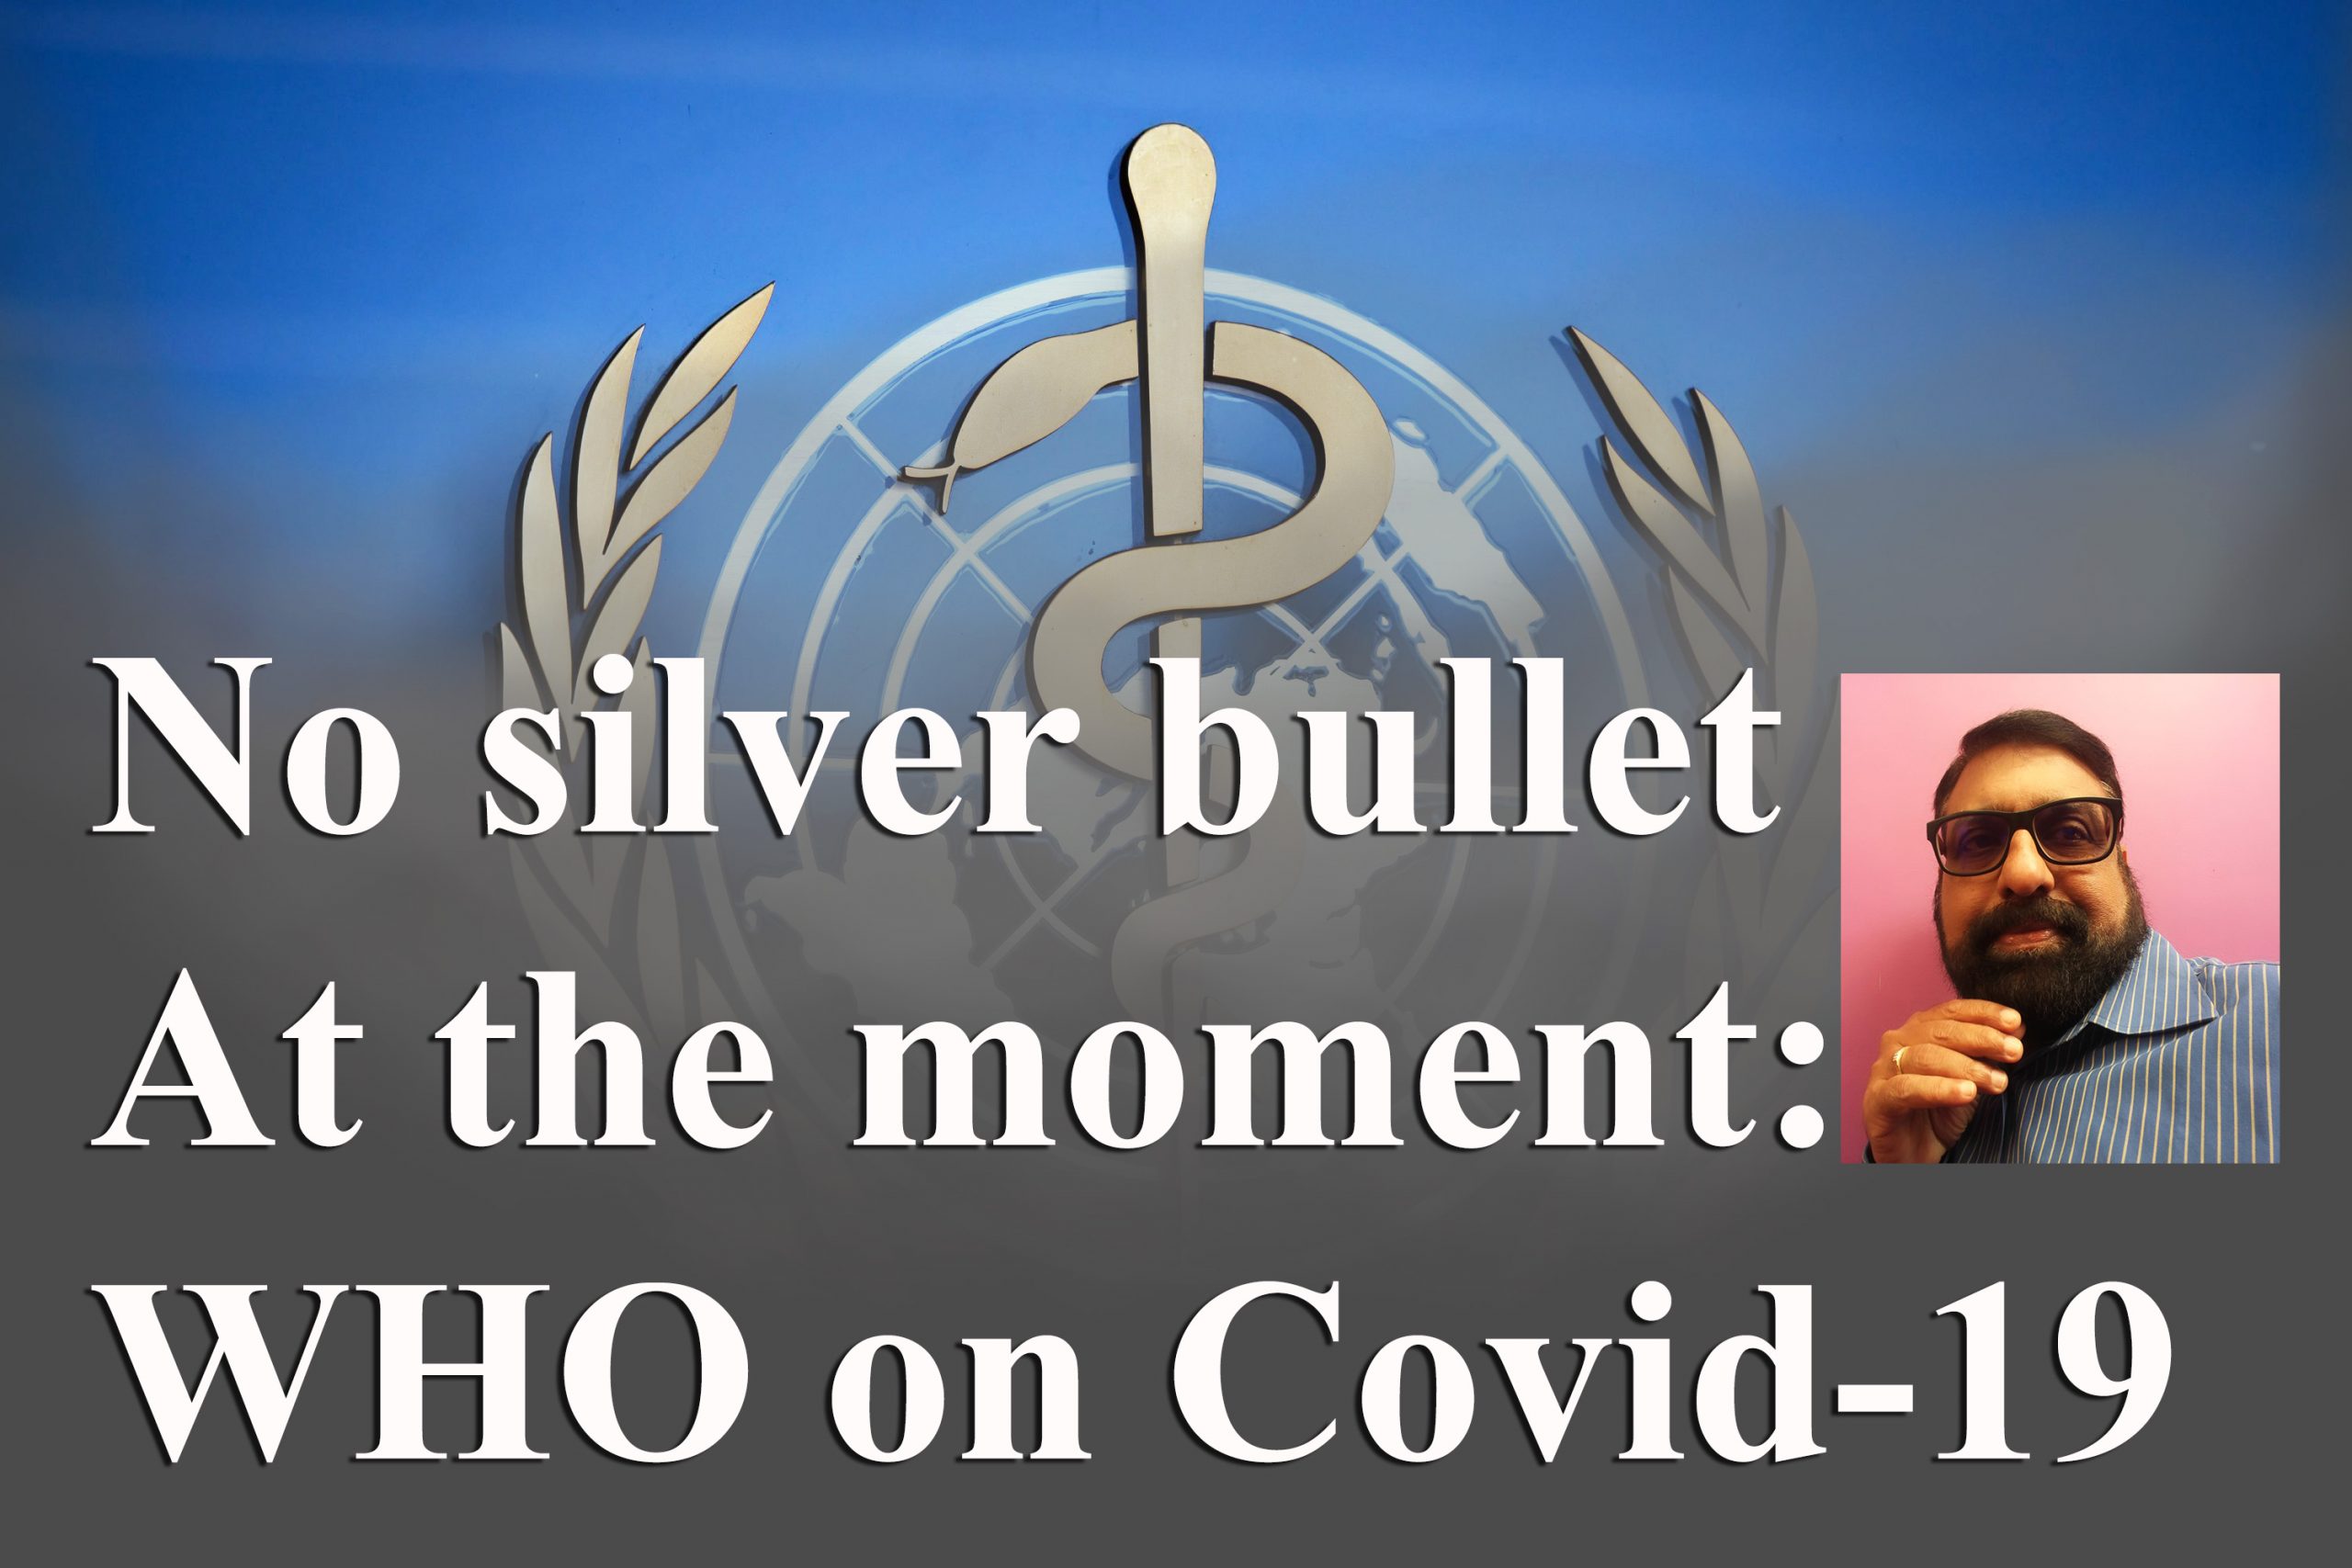 No silver bullet at the moment: WHO on Covid-19